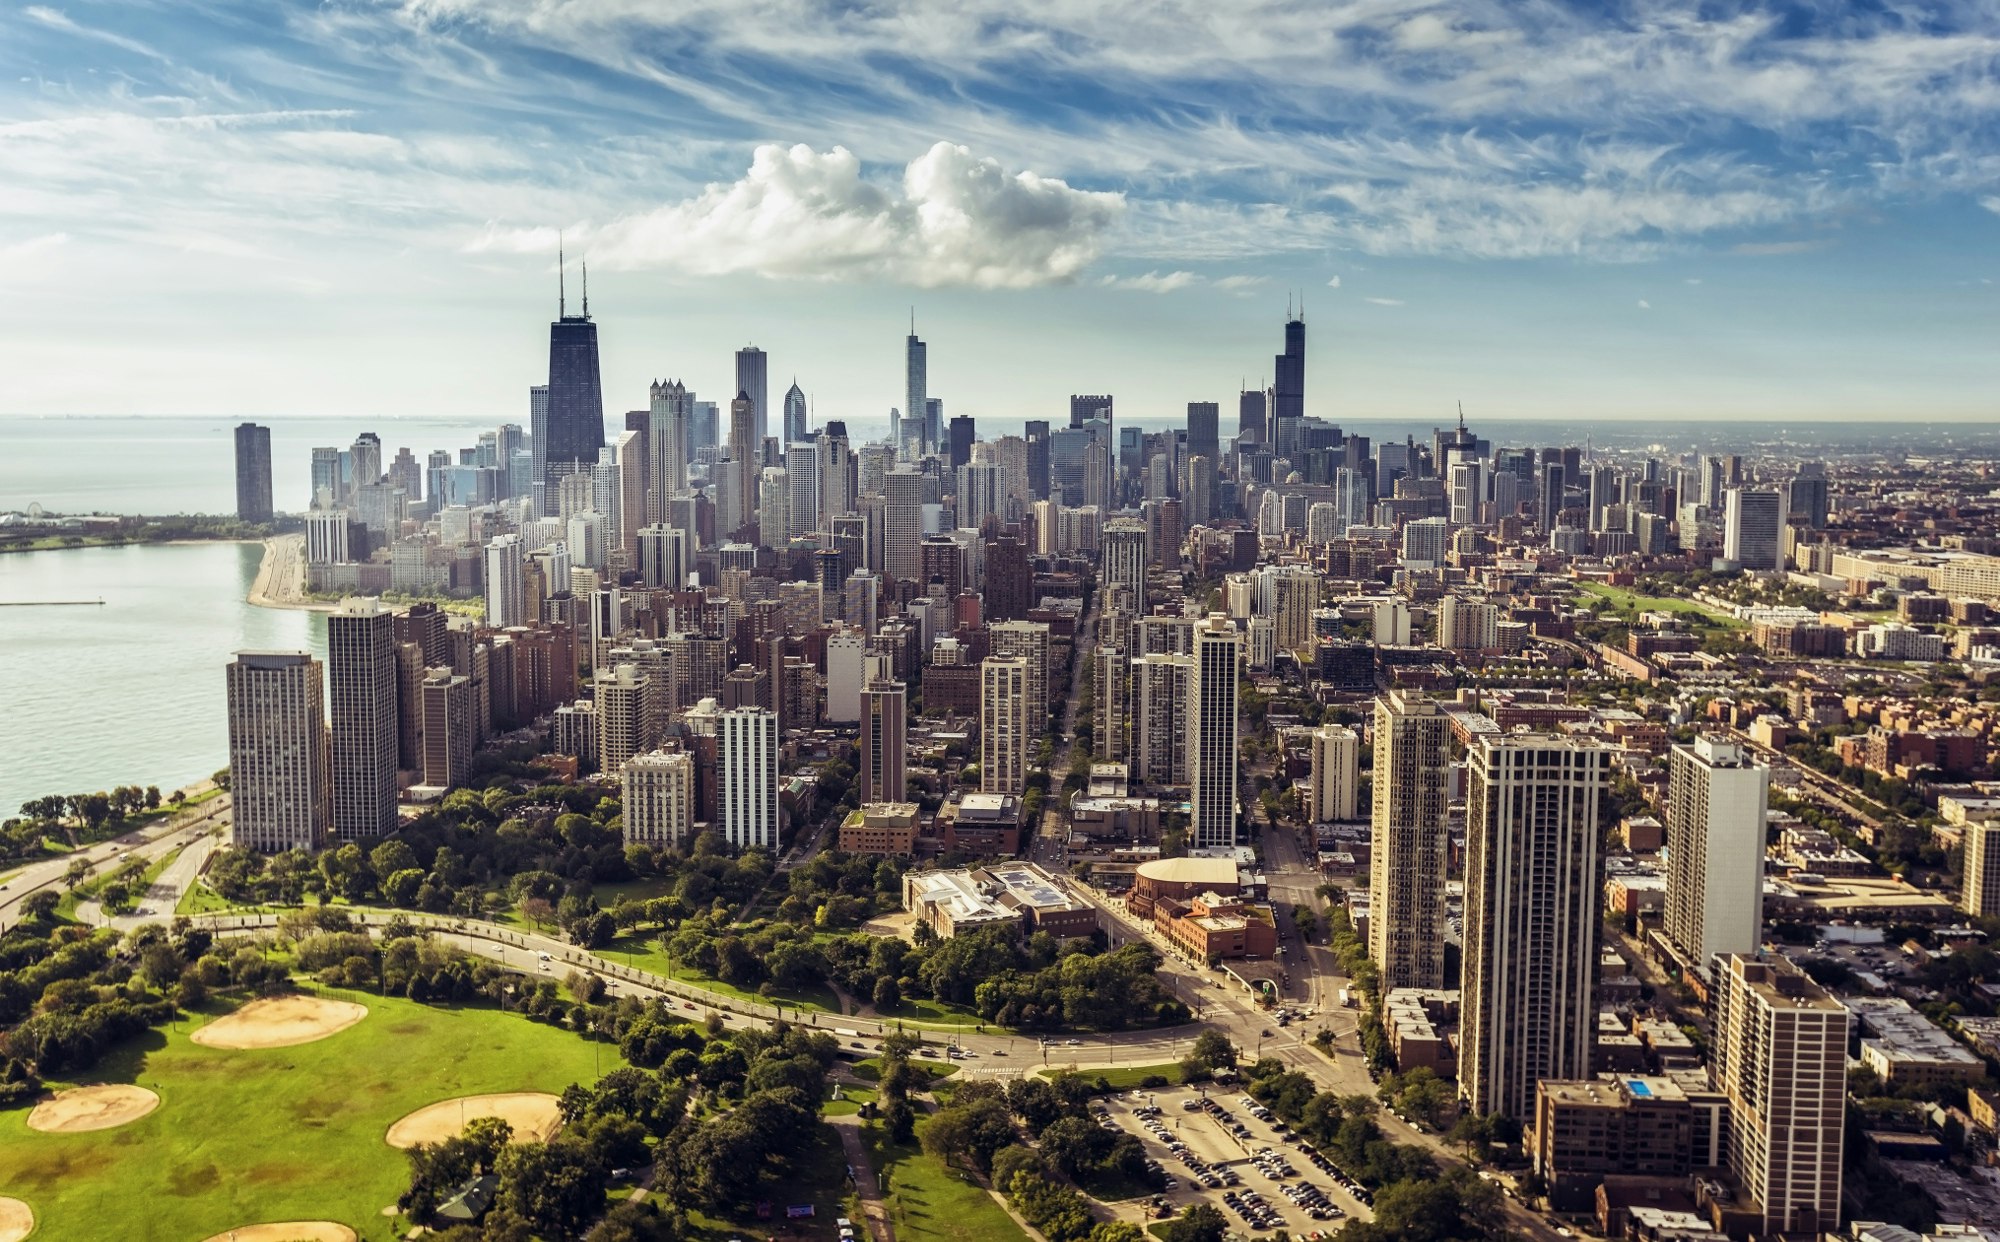 Chicago topped the list of best cities in the world in the 2018 Time Out City Life Index.